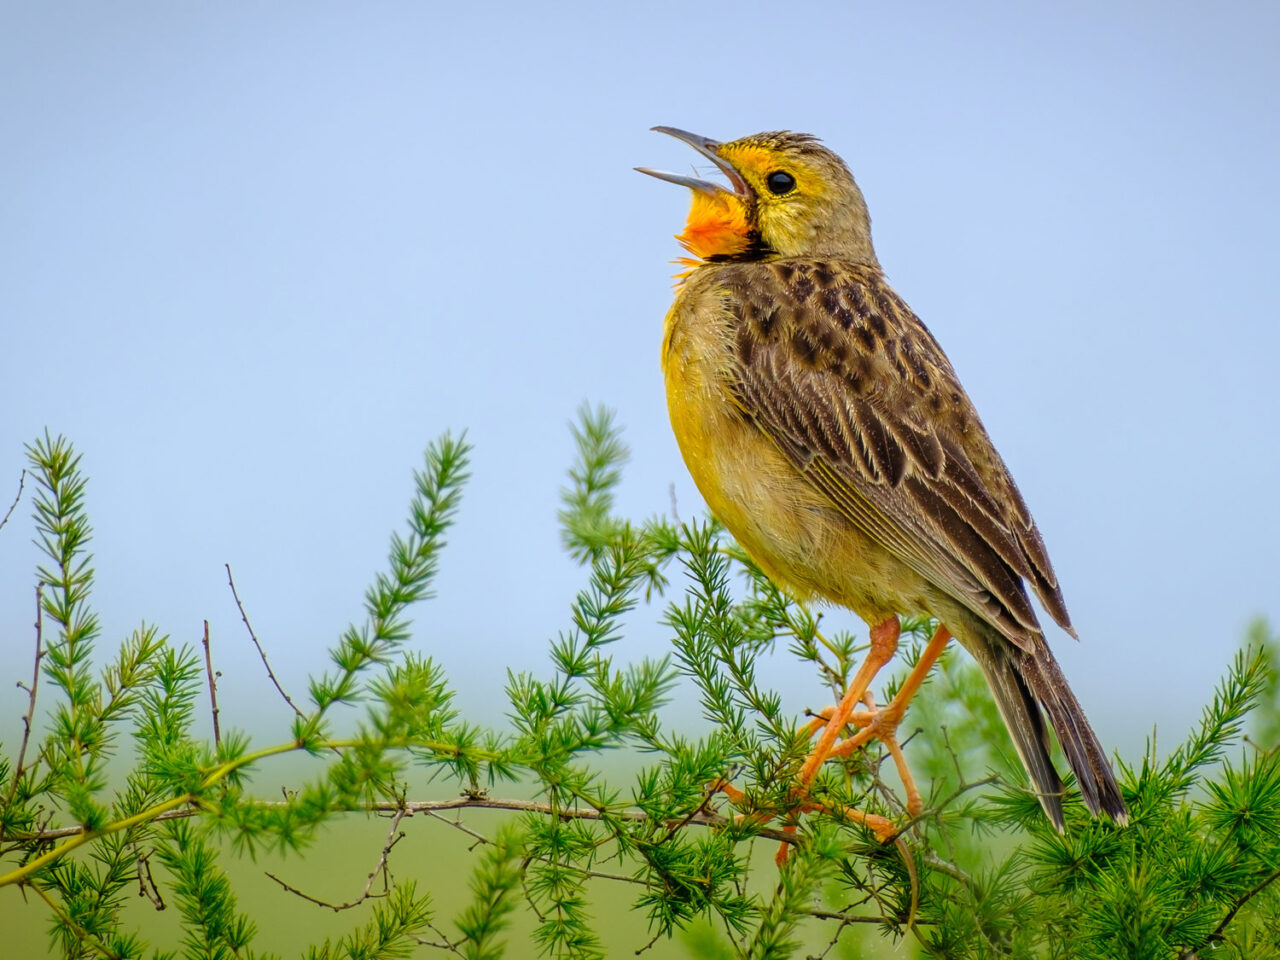 A yellow songbird perches on a shrub and sings.